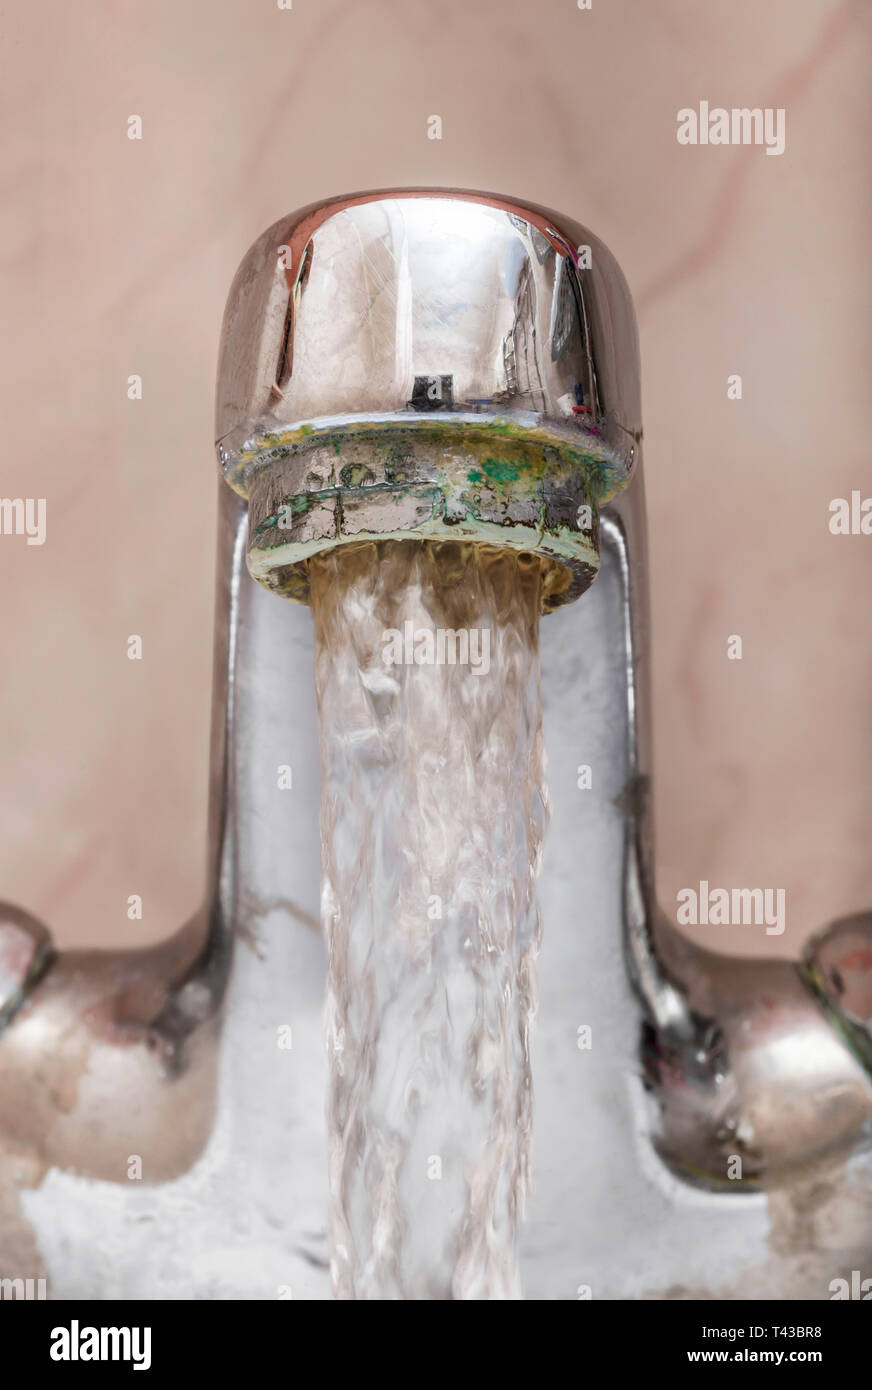 Vertical macro image of a tap with water flowing strongly under high pressure Stock Photo